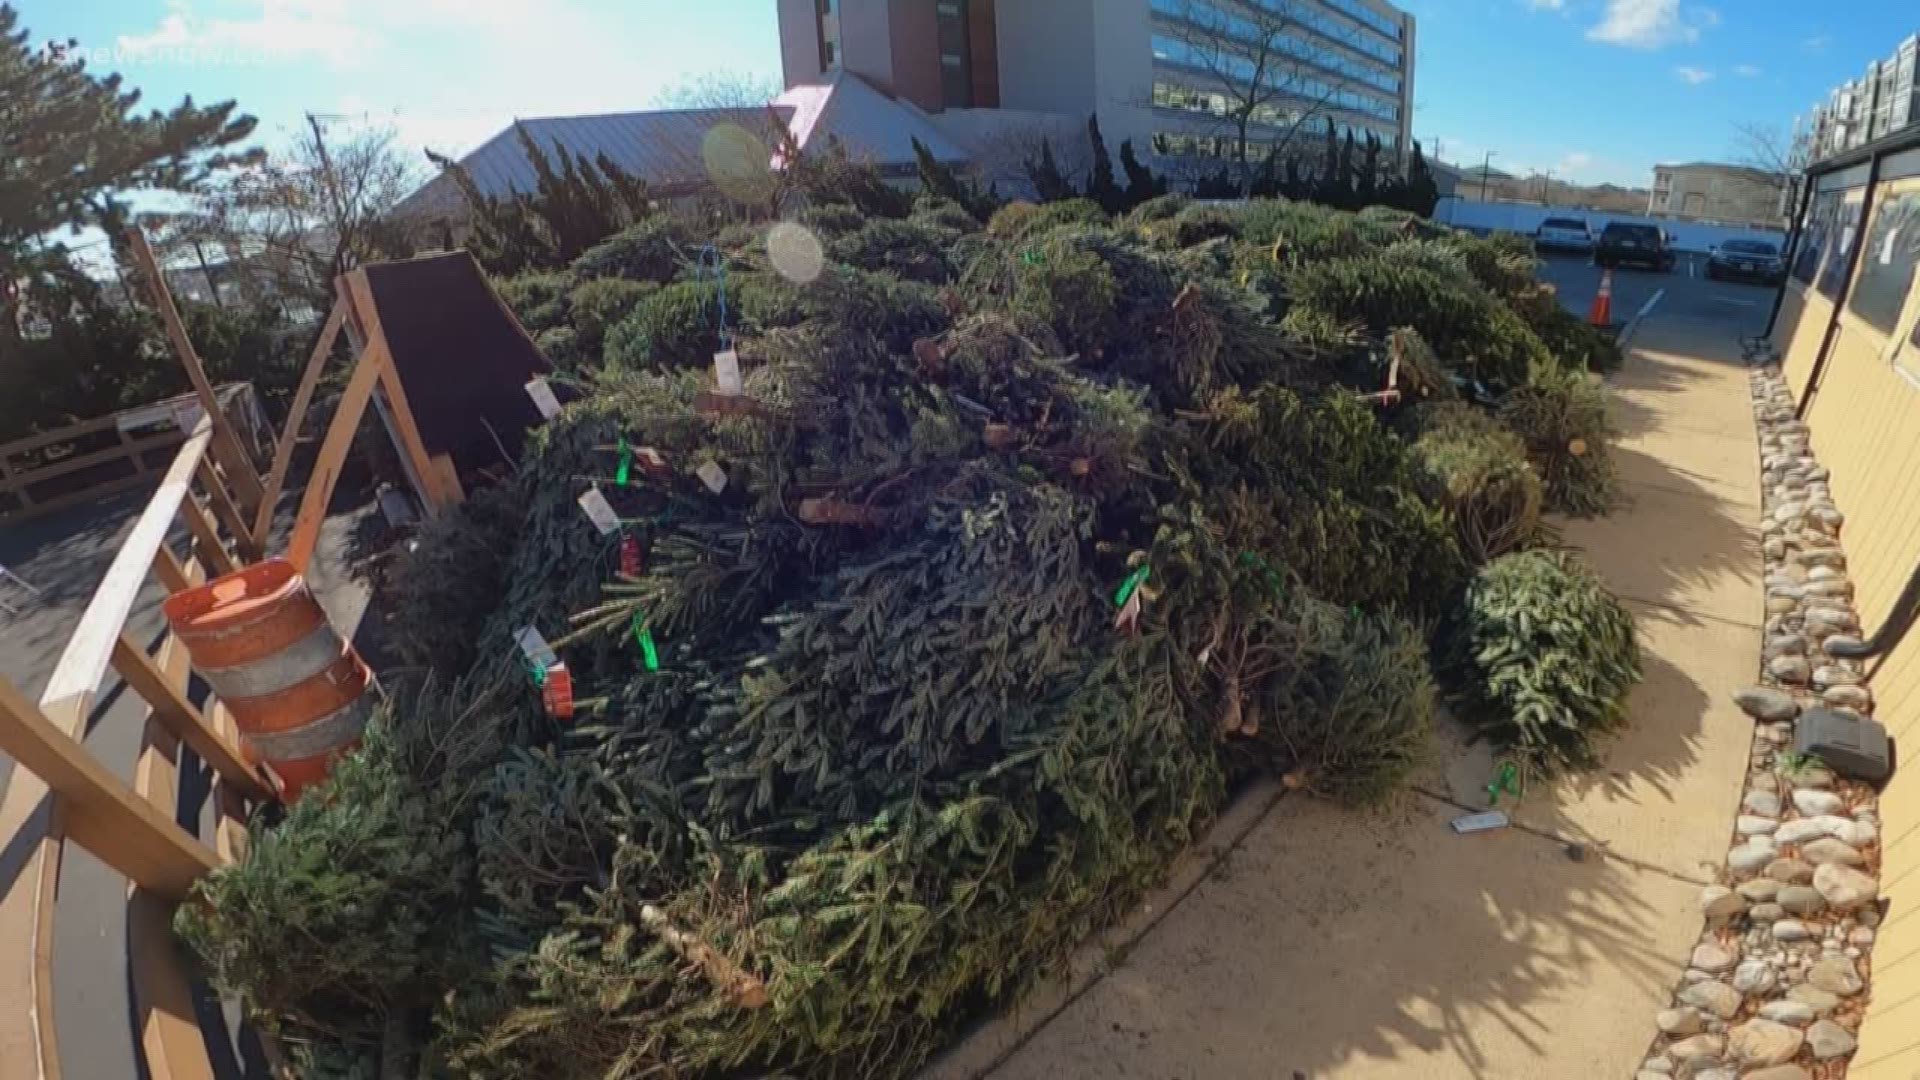 Staff at one Oceanfront business will take the tree to help replenish beaches. Chicho's Pizza and Community House are teaming up to collect the trees.